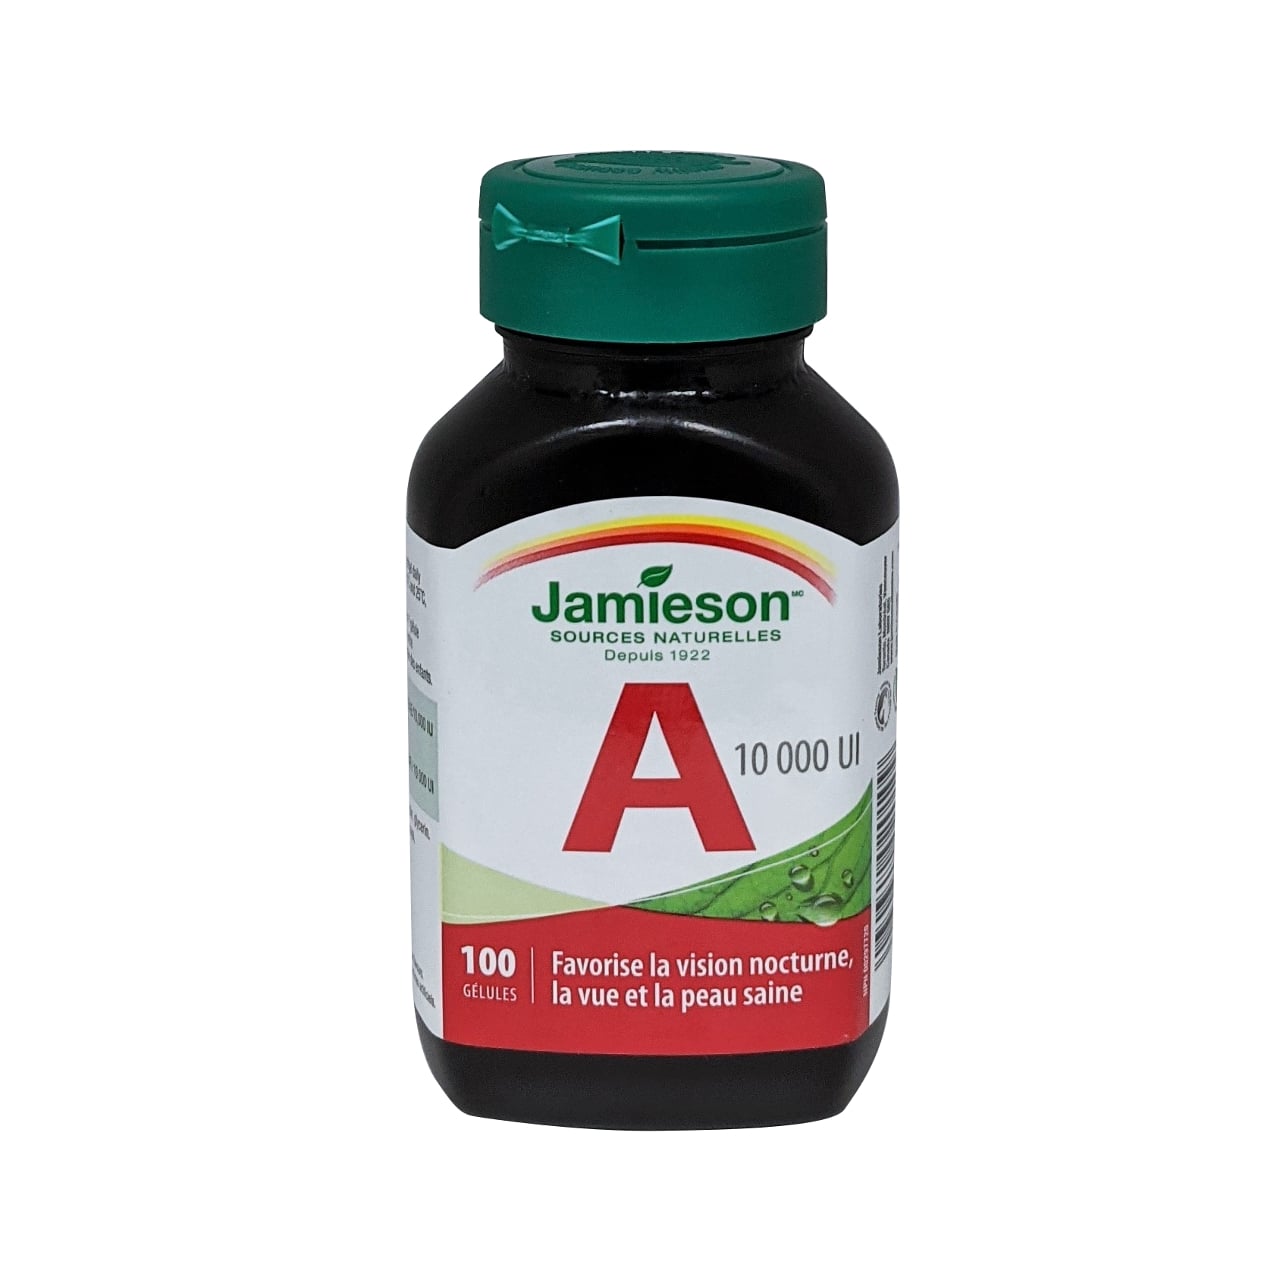 Product label for Jamieson Vitamin A (10,000 IU) (100 softgels) in French